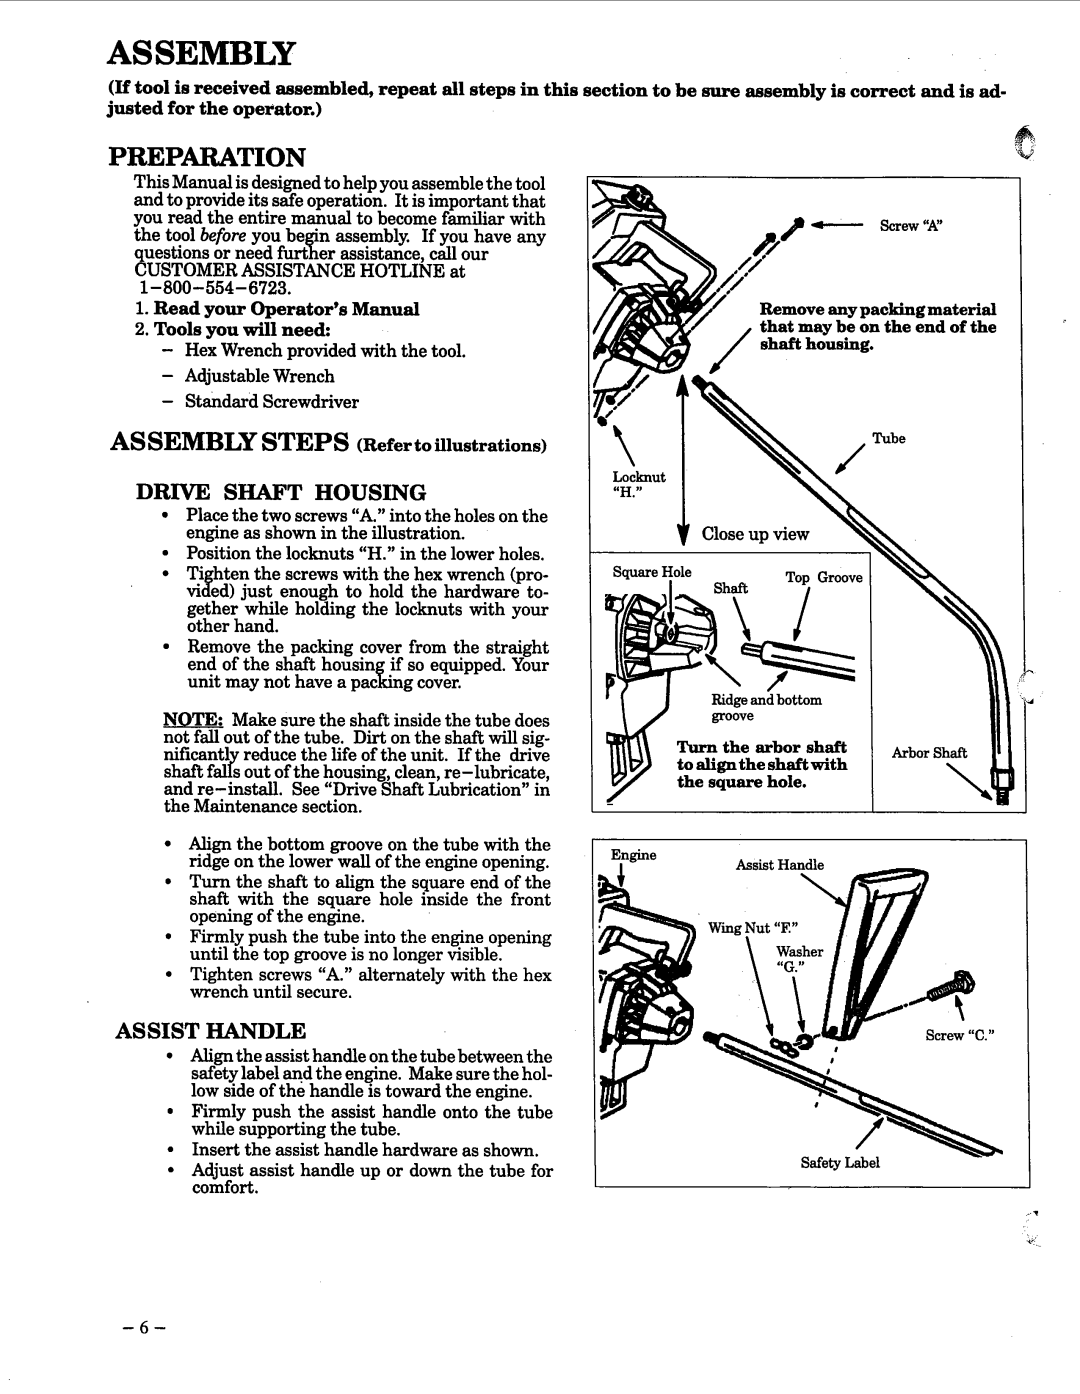 Weed Eater 15T manual 